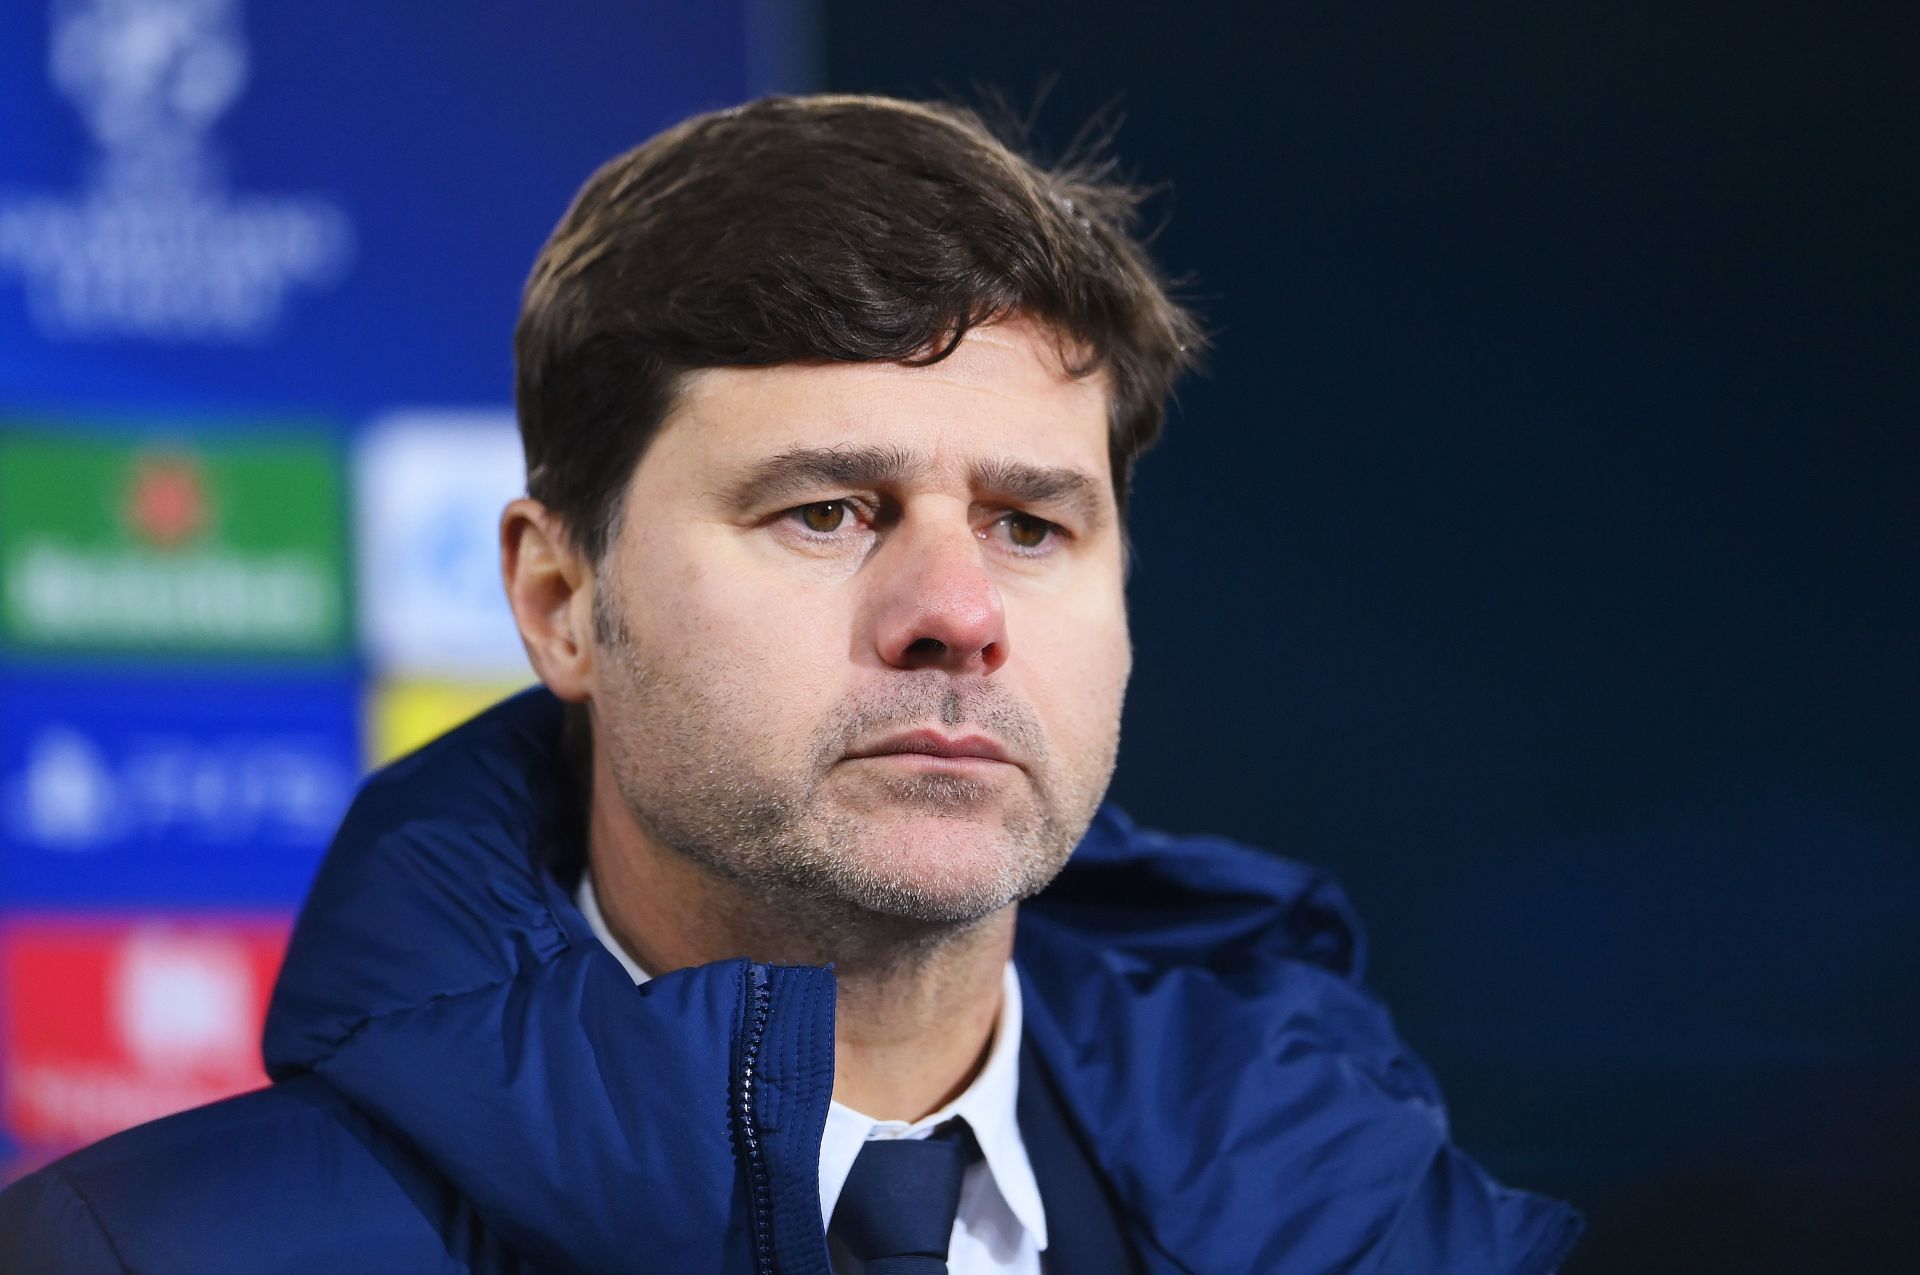 Pochettino had been linked with Manchester United prior to the loss